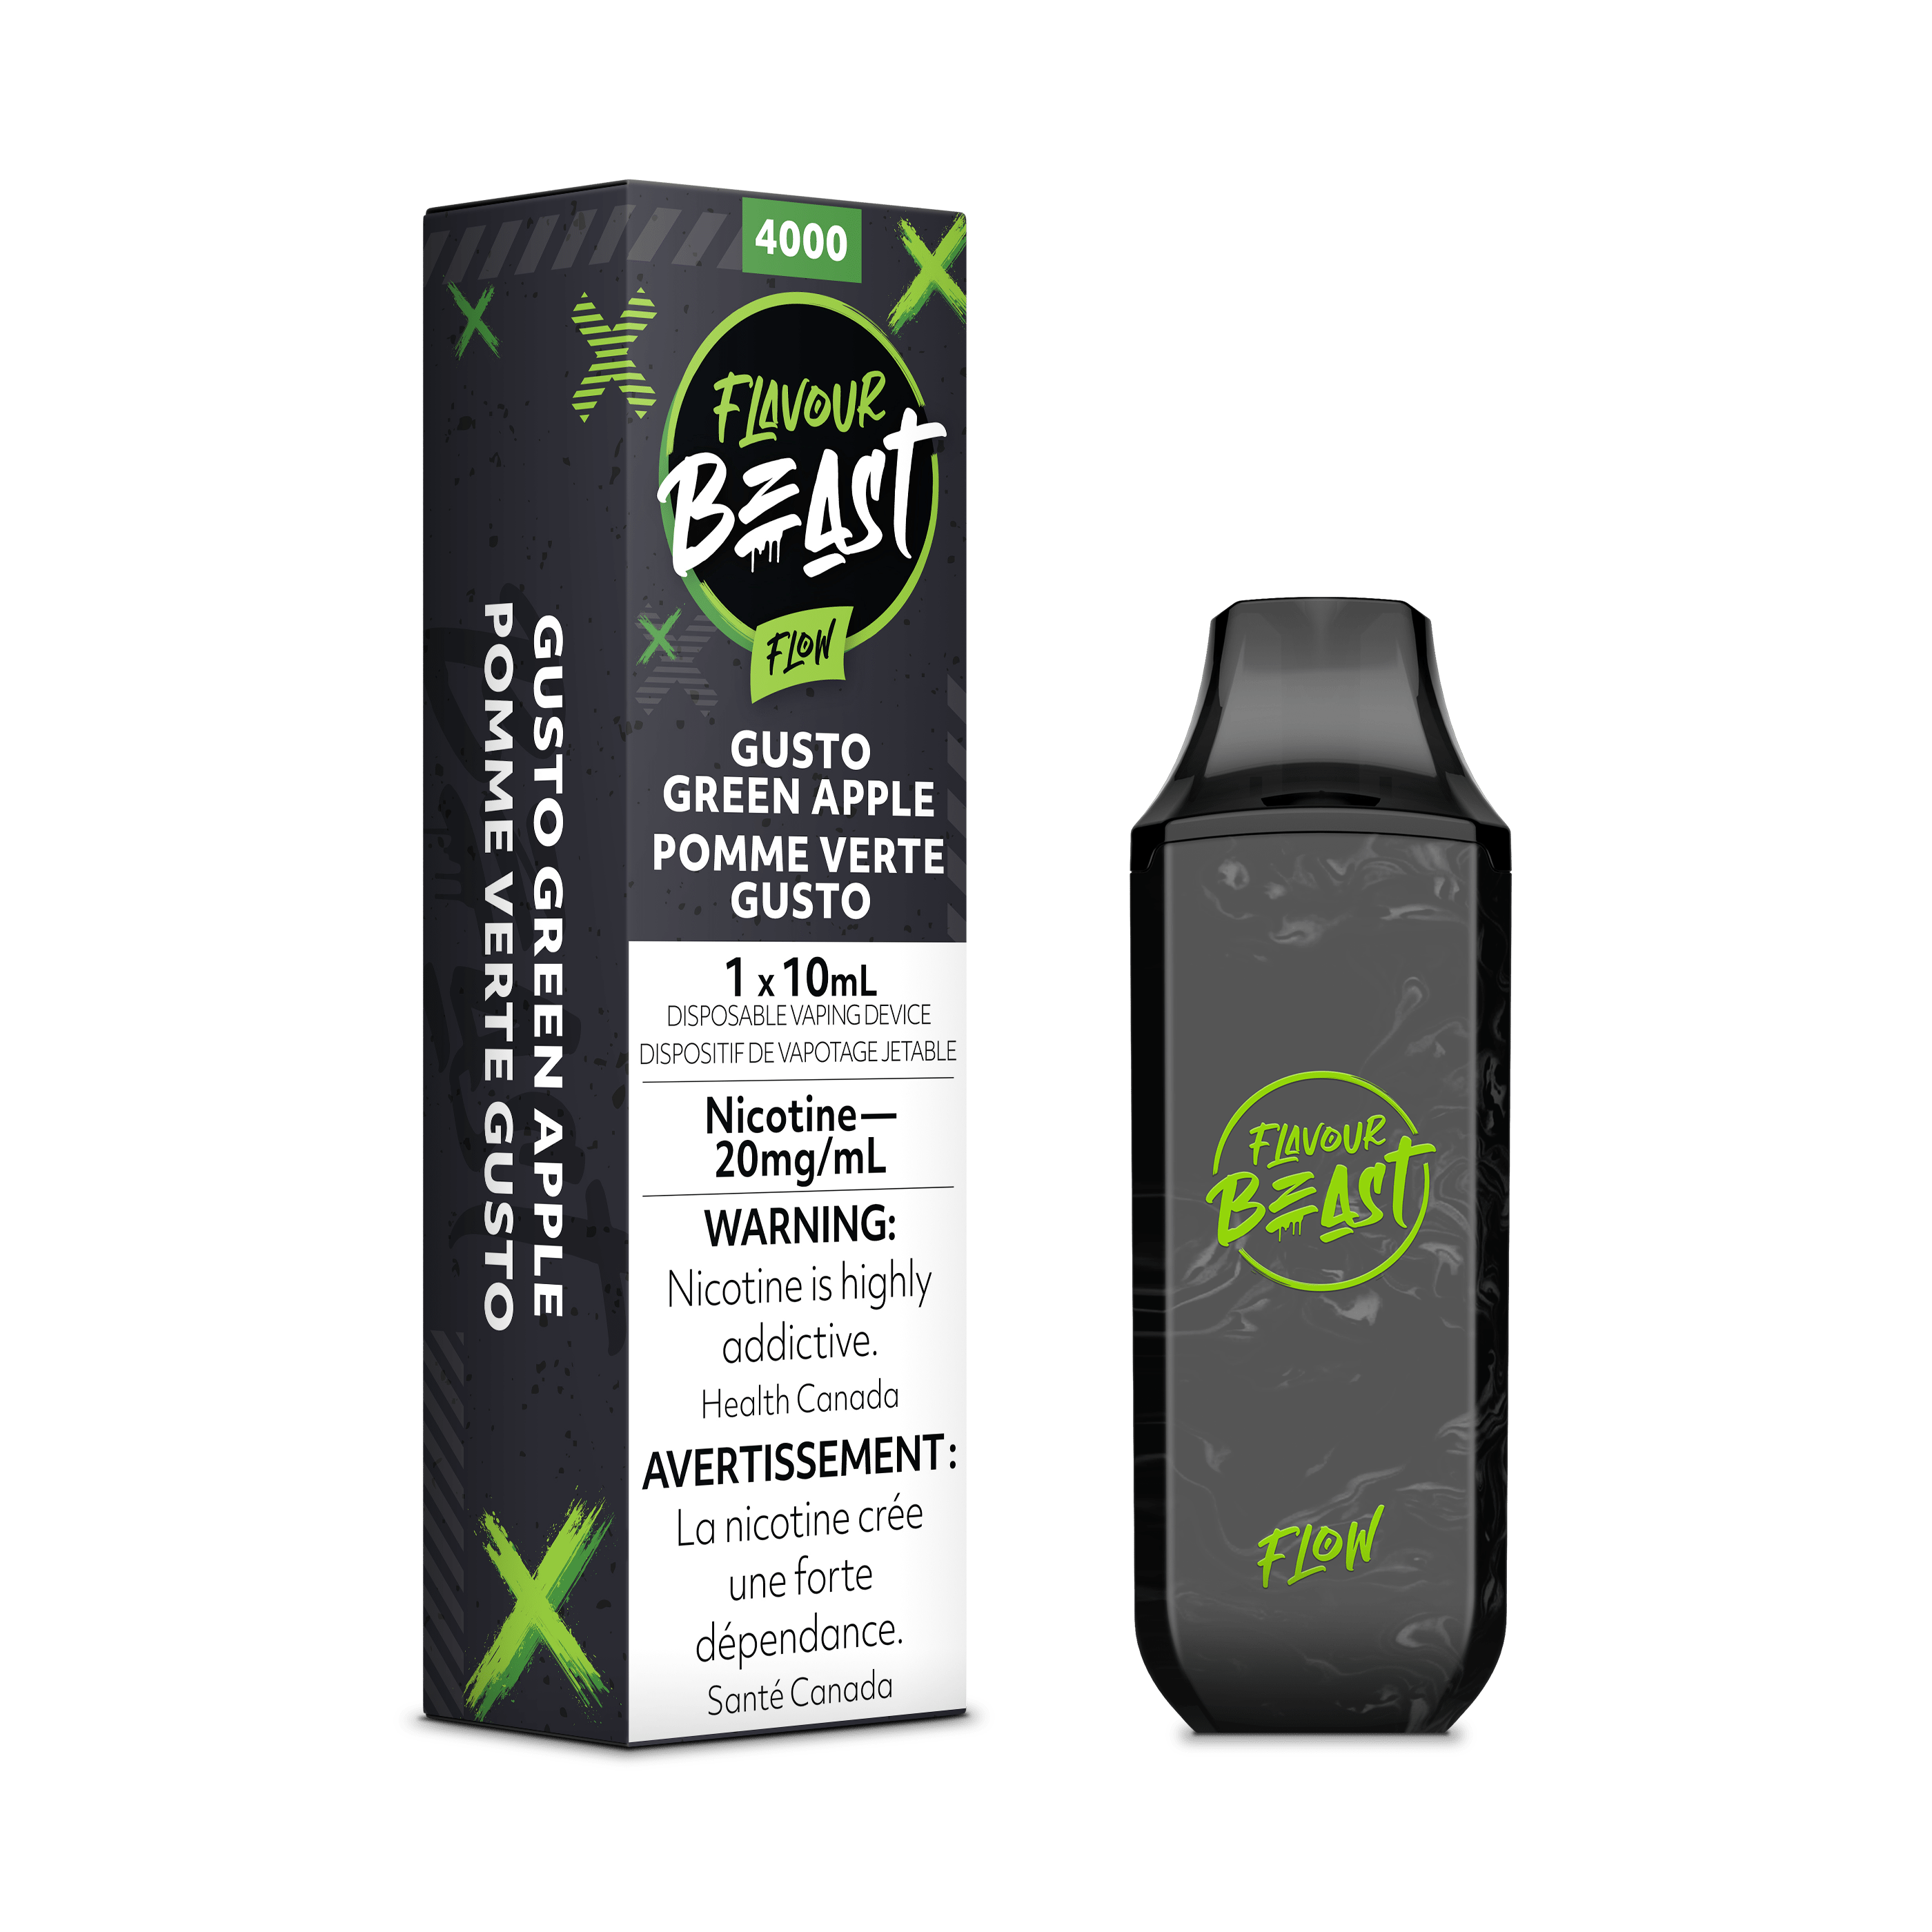 Flavour Beast Flow Disposable Vape - Gusto Green Apple available on Canada online vape shop